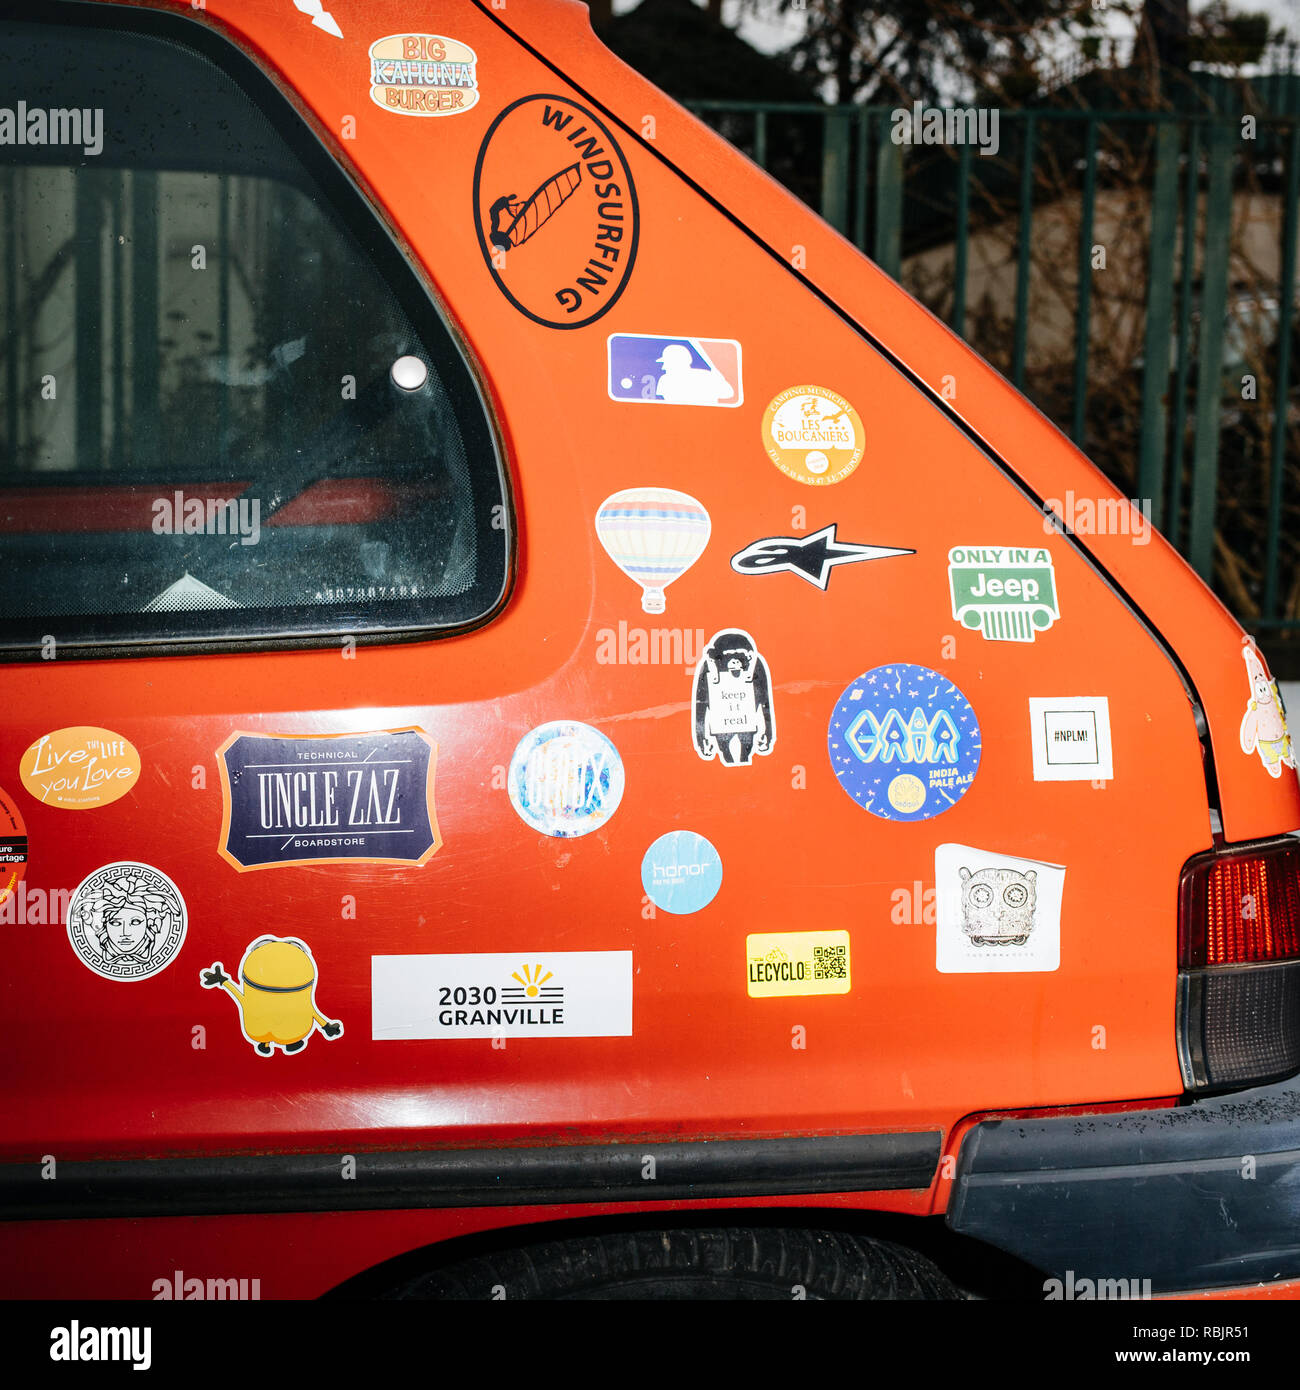 Strasbourg, France - Jan 1, 2019: Side view of red vintage Peugeot car with multiple stickers from know cartoon to diverse brands  Stock Photo